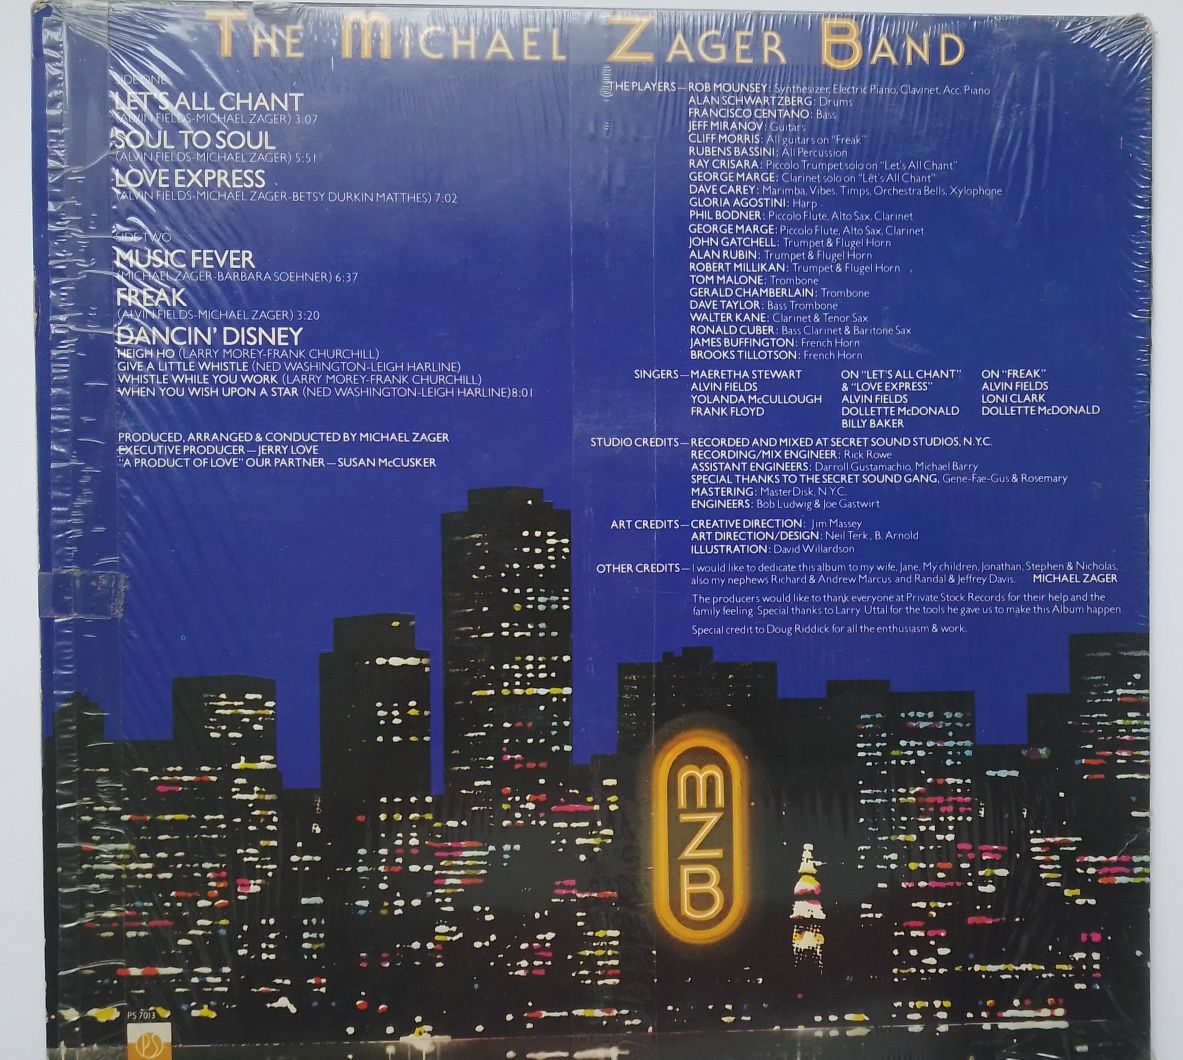 Диск винил. " The Michael Zager Band" 1978